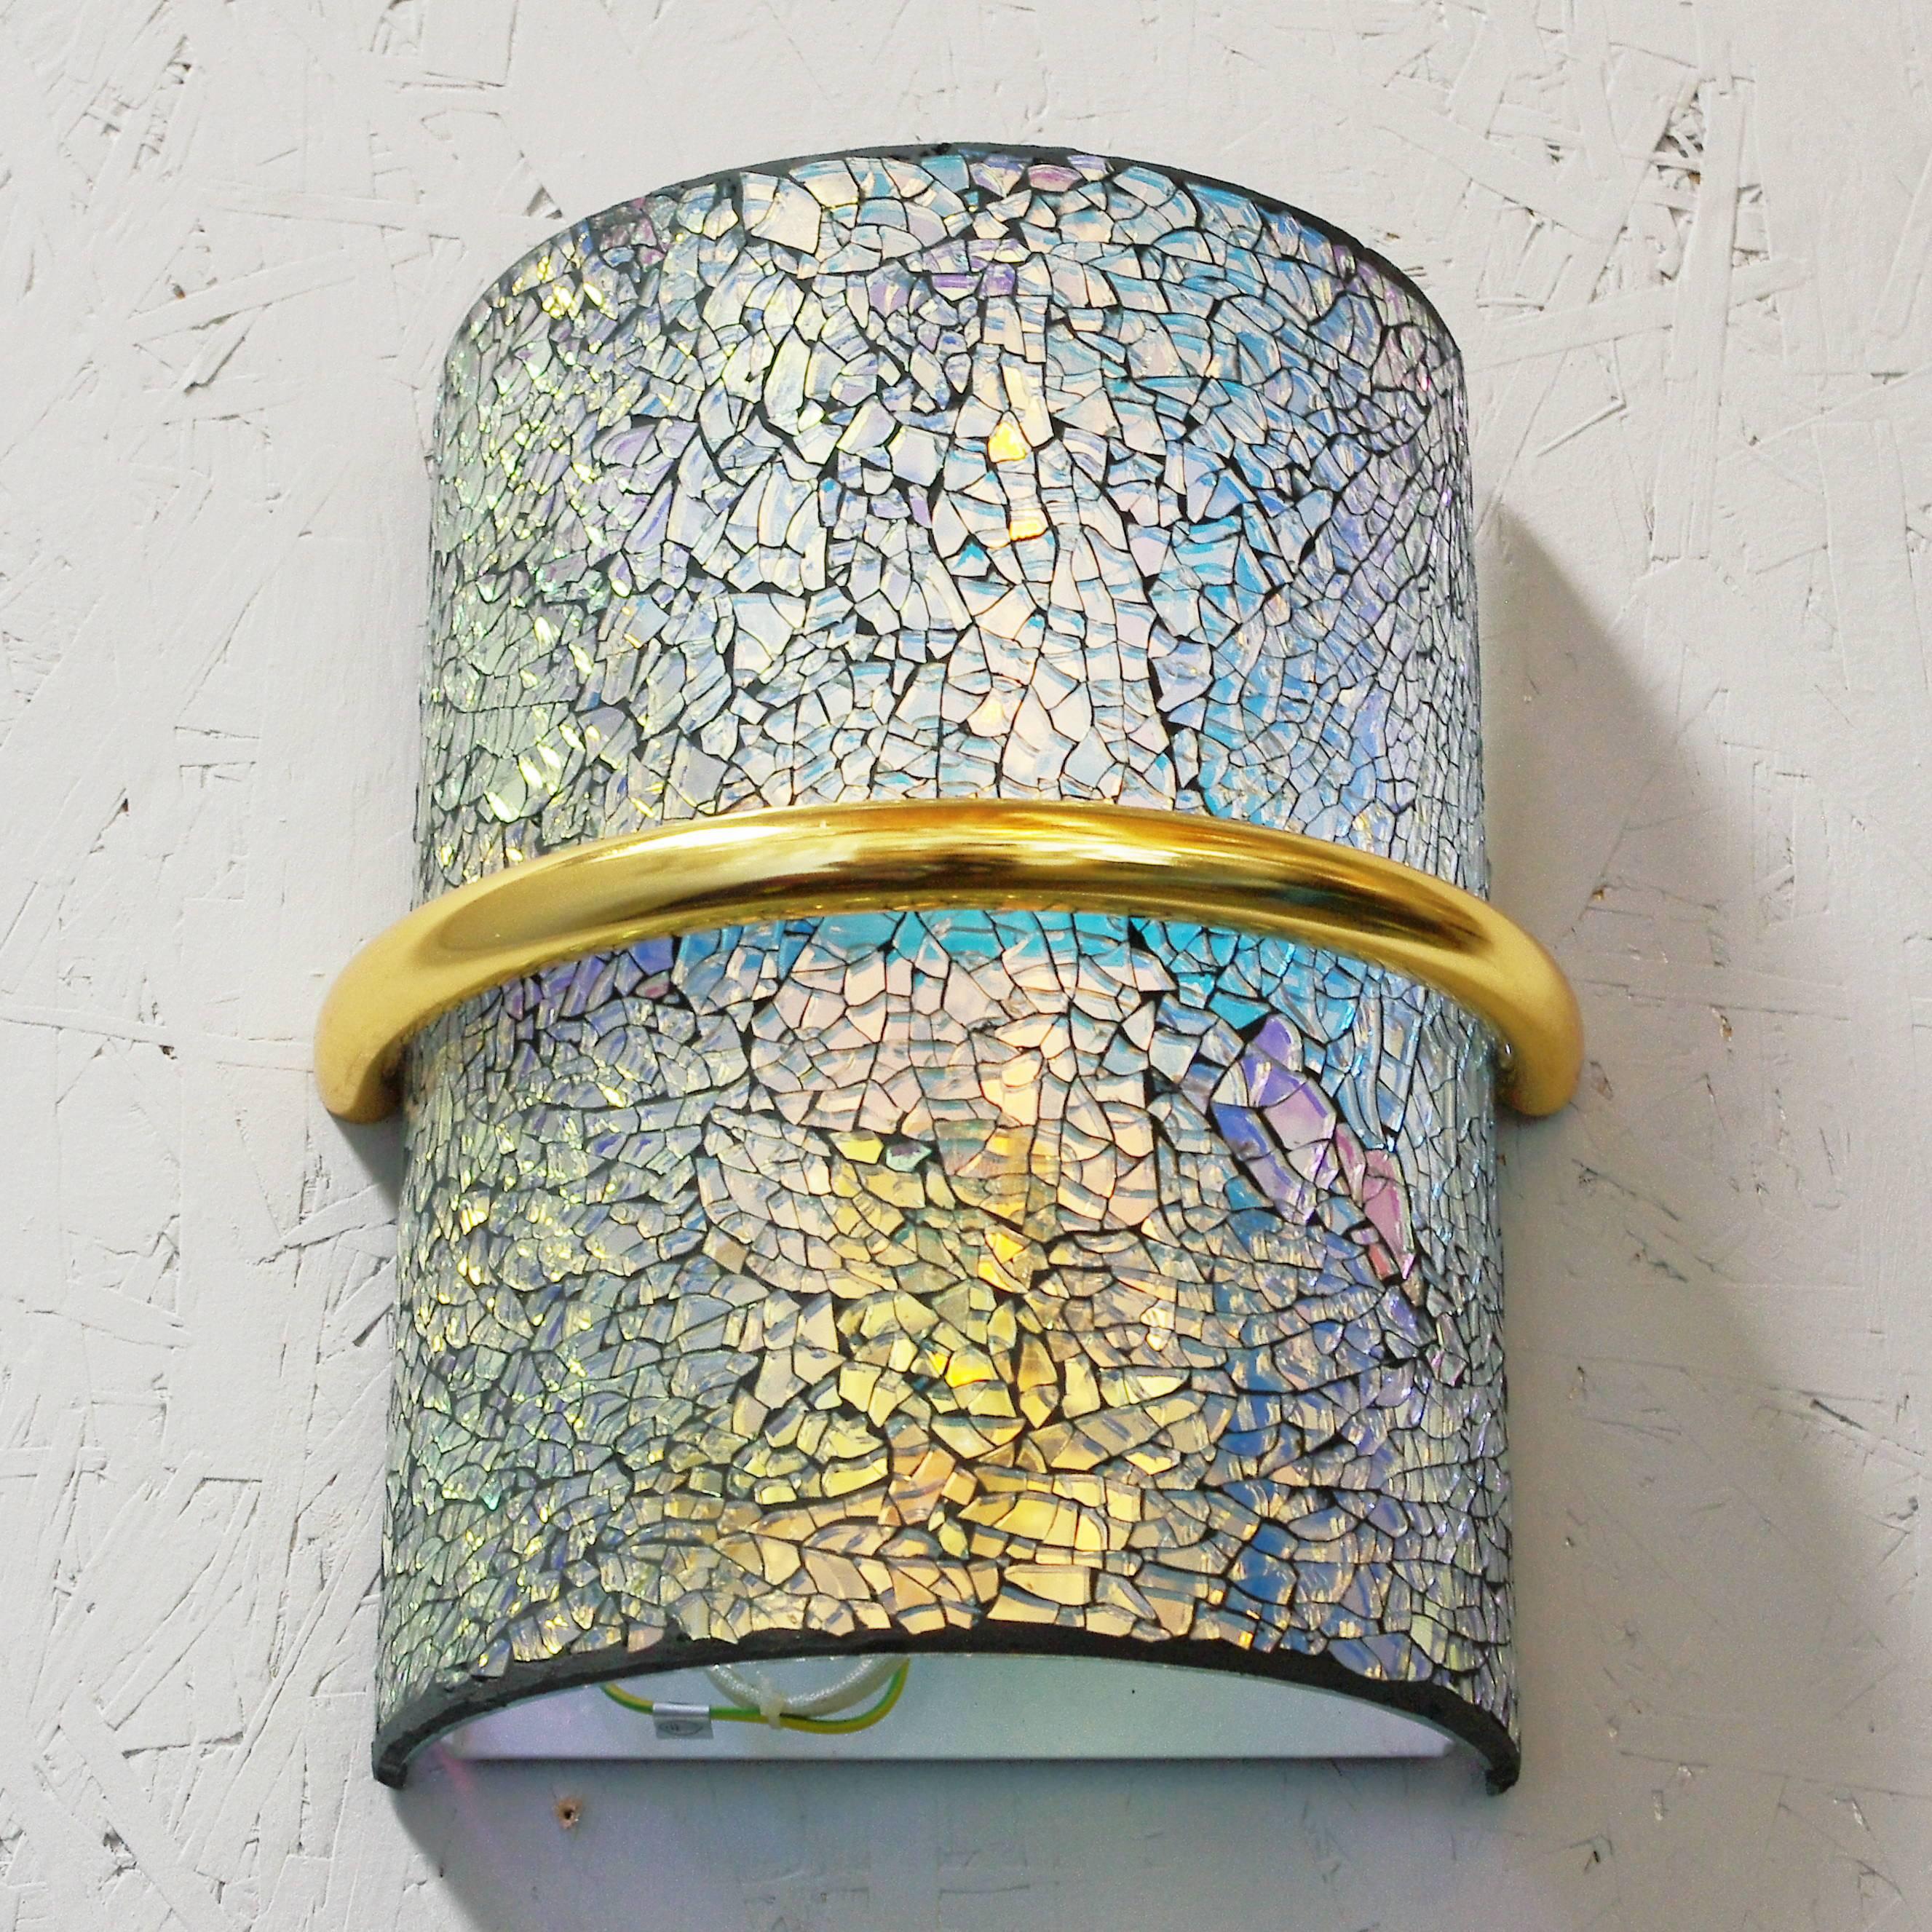 Limited edition stylish wall lights with beautiful crackled iridescent glasses on gold plated frames / Designed by Fabio Bergomi for Fabio Ltd
1 light / E26 or E27 type / max 60W
Measures: Height 11 inches, width 9 inches, depth 5 inches 
12 in